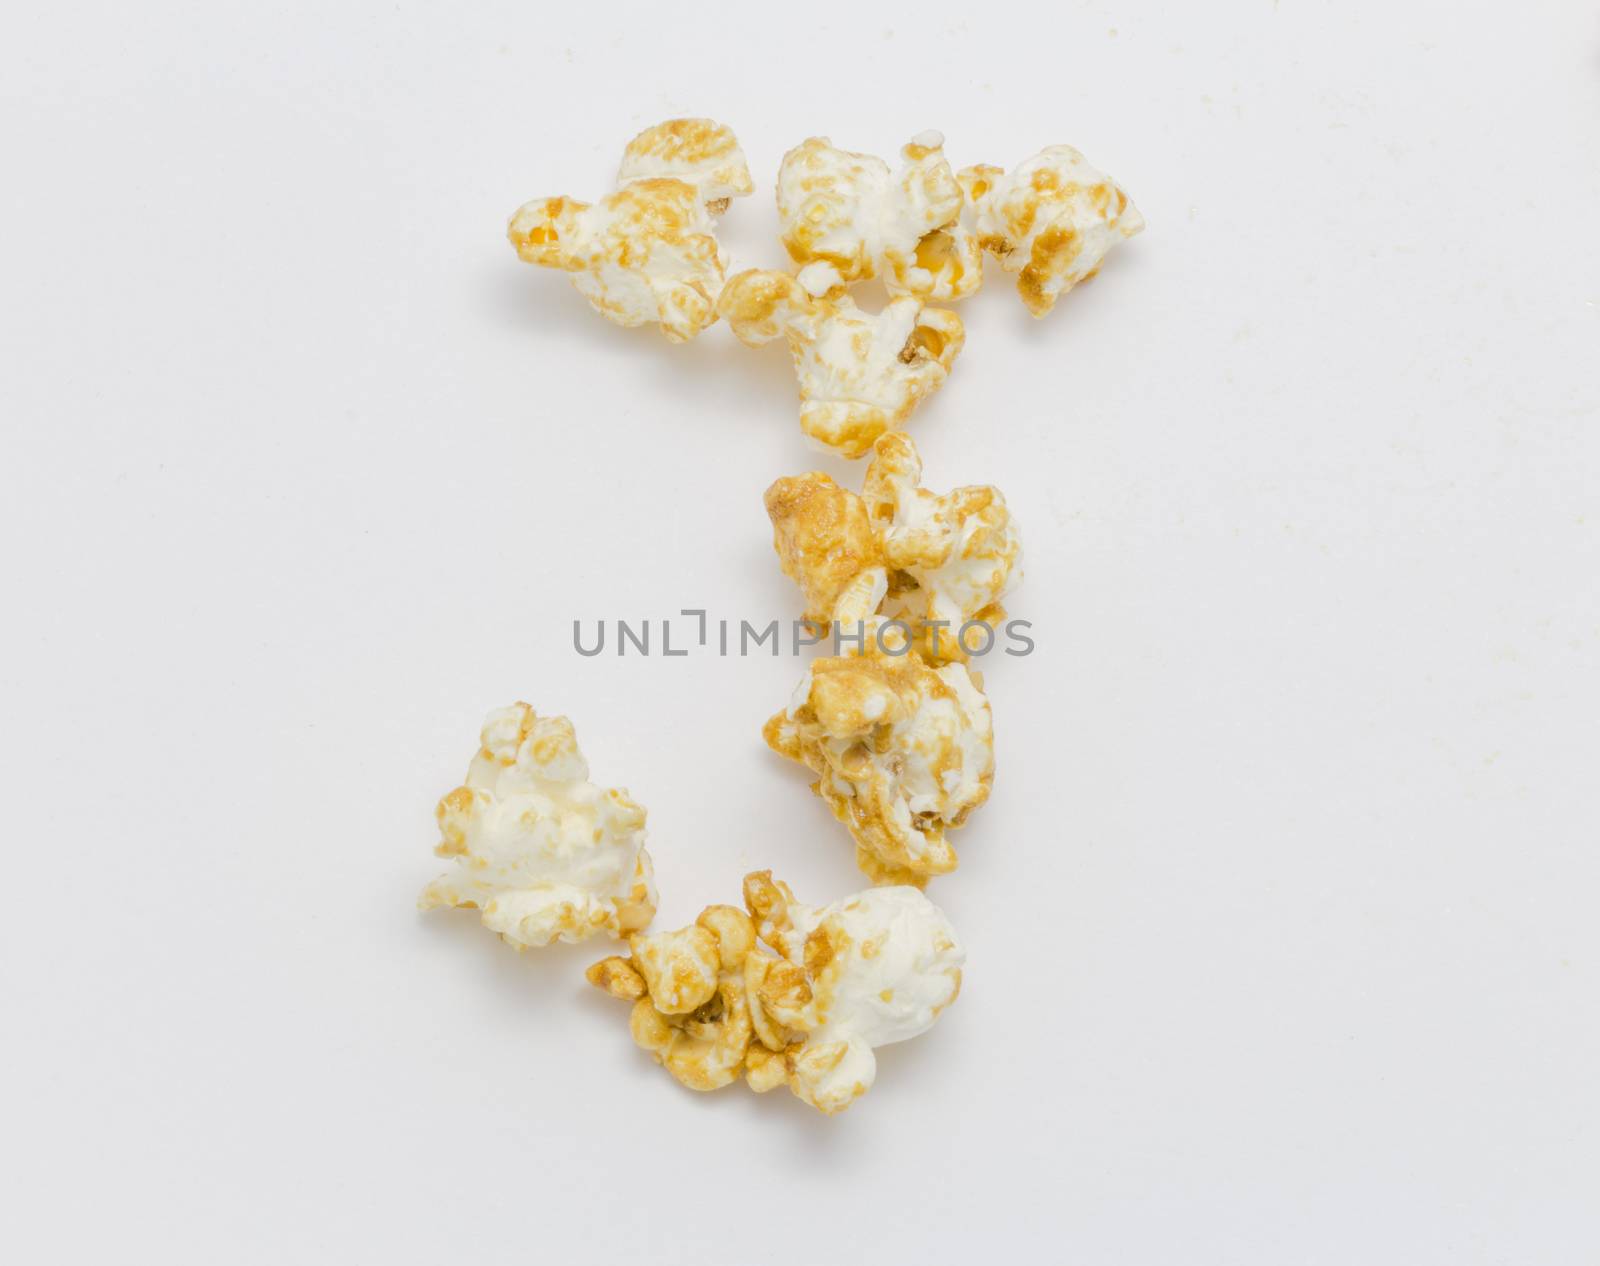 pop corn forming letter J isolated on white background by chingraph